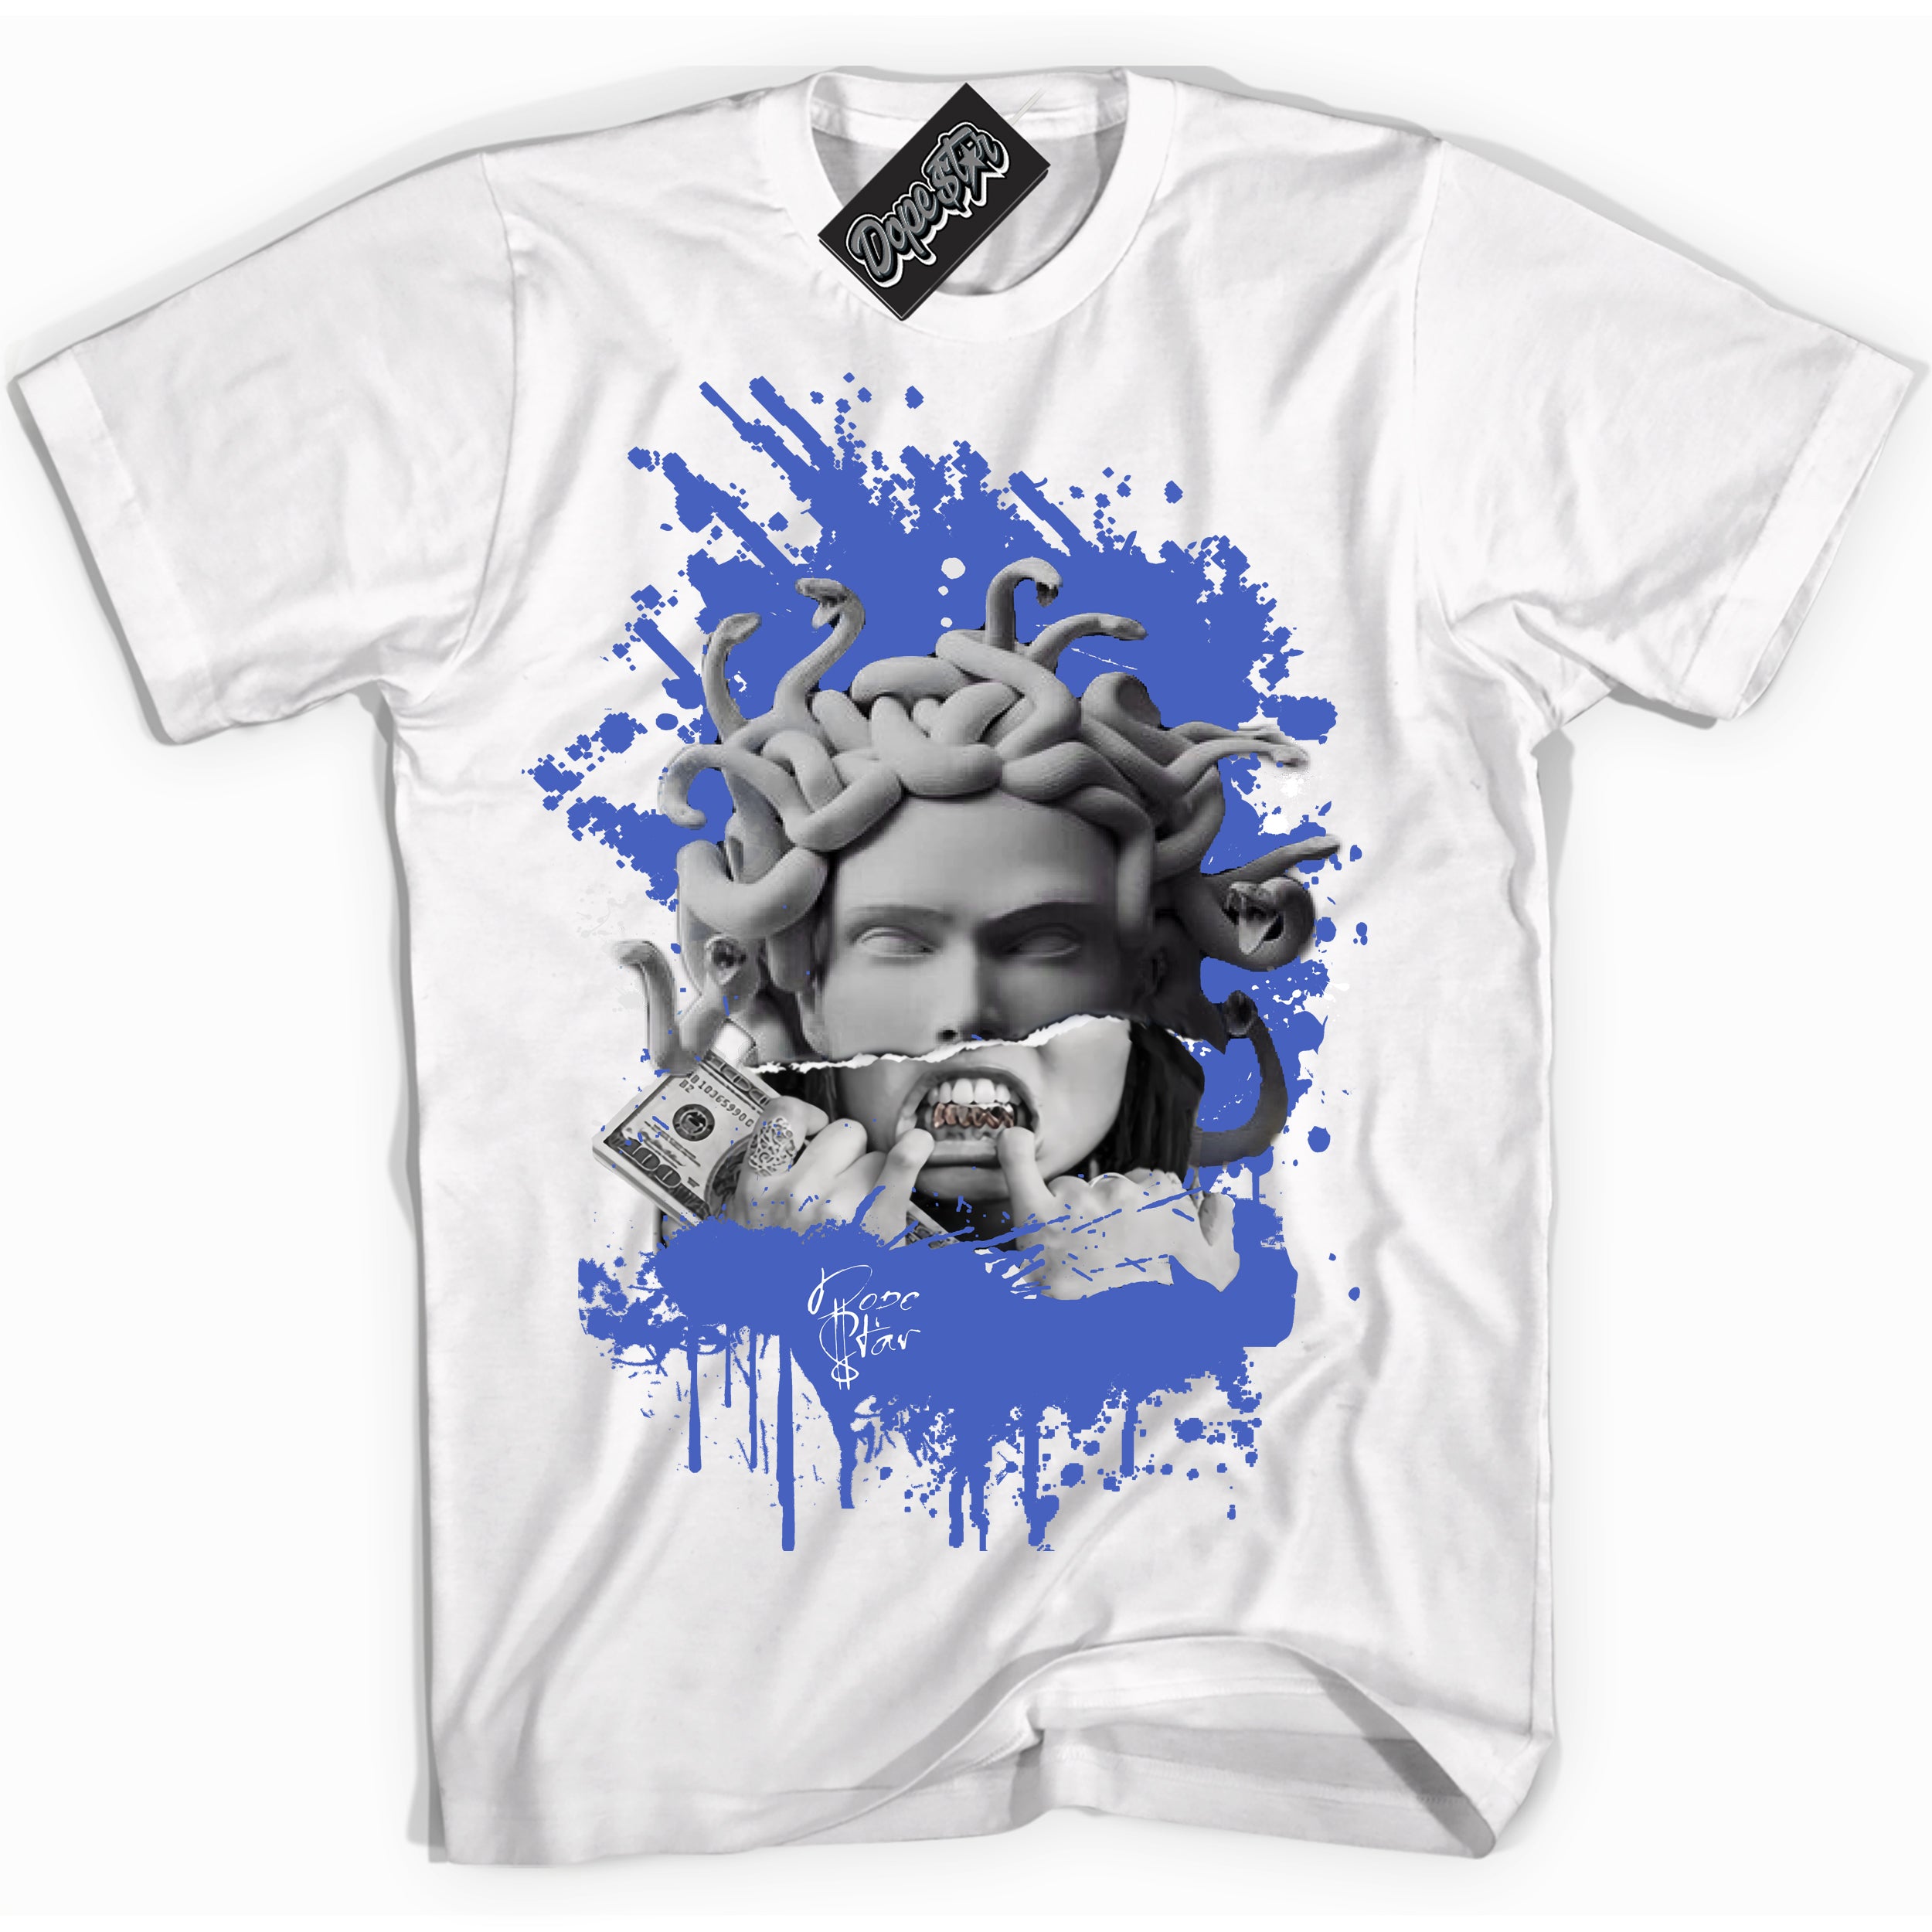 Cool White graphic tee with “ MEDUSA ” print, that perfectly matches Nike Dunk Disrupt 2 Hyper Royal sneakers